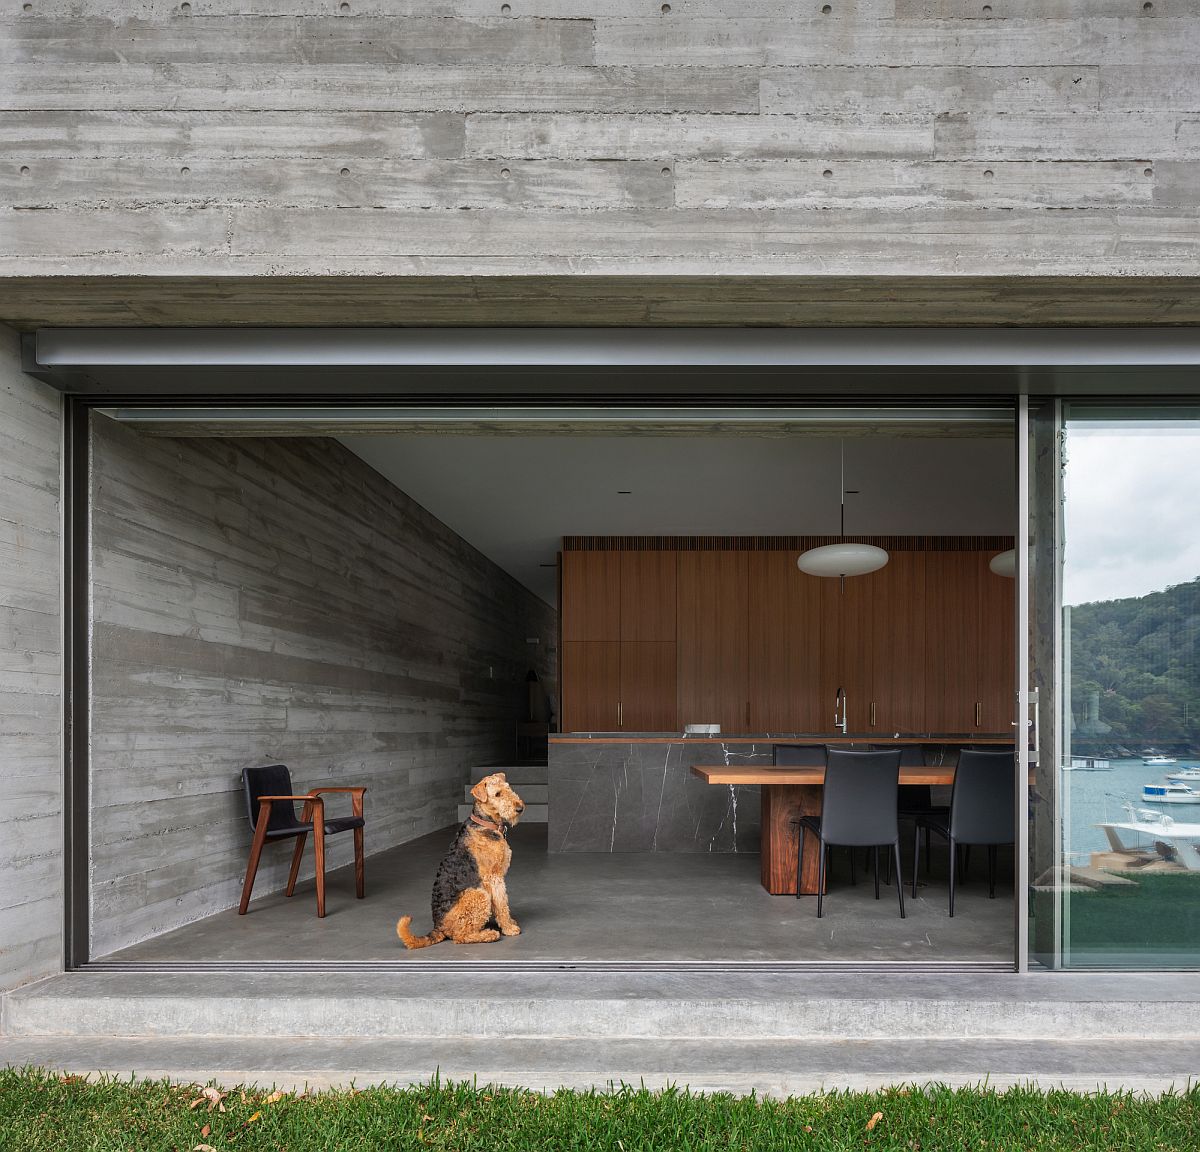 Exposed concrete walls shape the interior of the house with sliding glass walls connecting it to th exterior